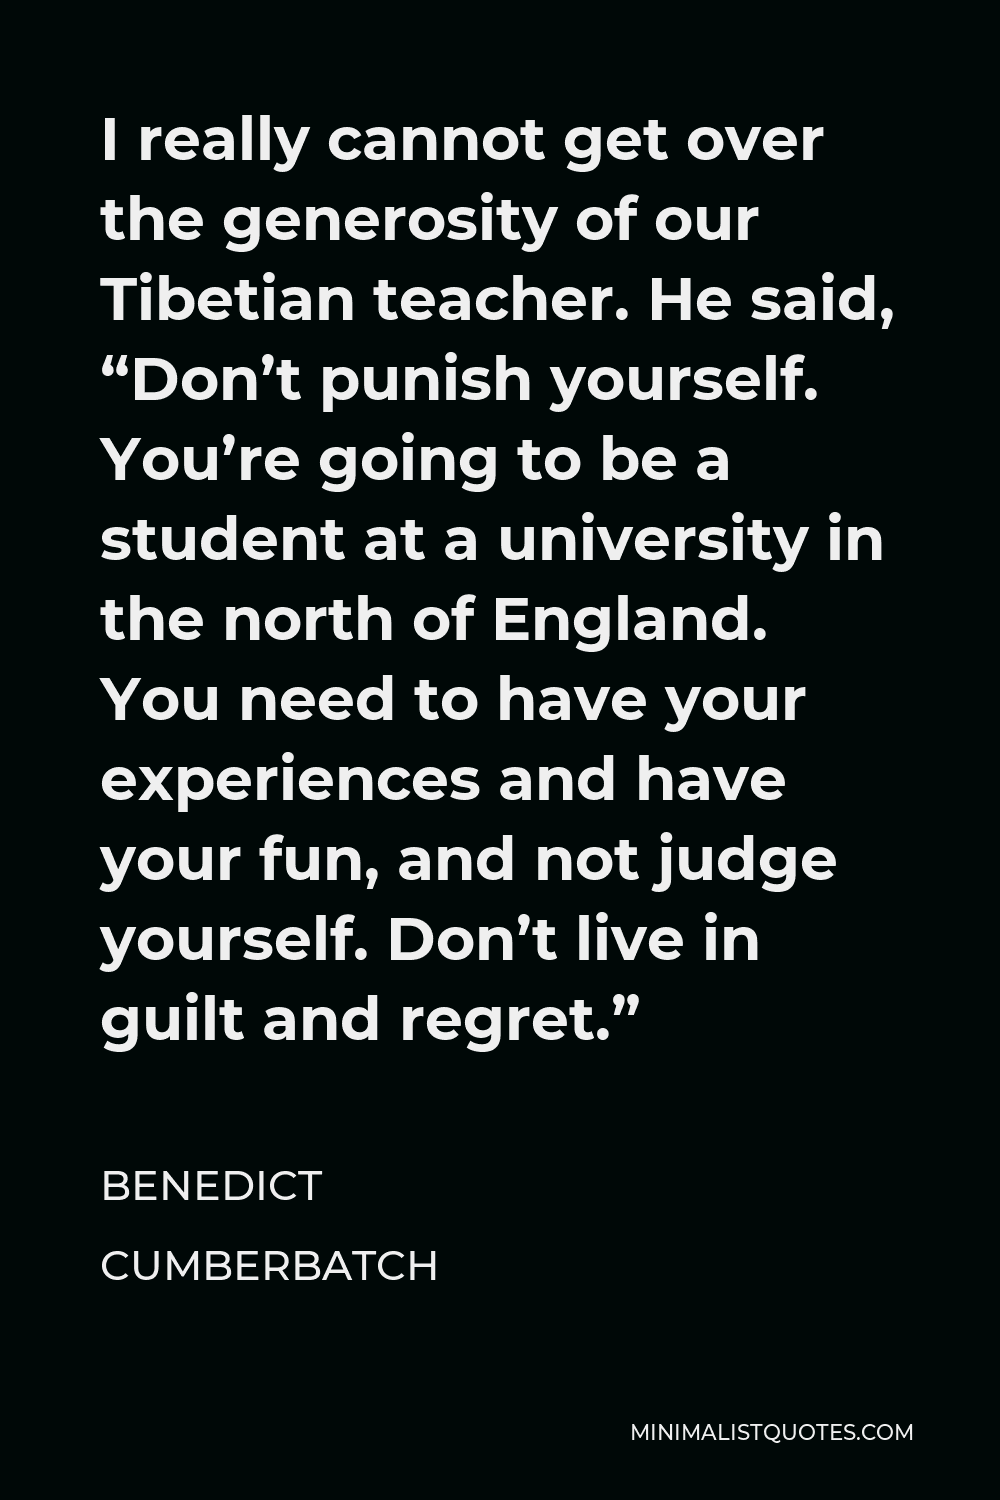 Benedict Cumberbatch Quote - I really cannot get over the generosity of our Tibetian teacher. He said, “Don’t punish yourself. You’re going to be a student at a university in the north of England. You need to have your experiences and have your fun, and not judge yourself. Don’t live in guilt and regret.”